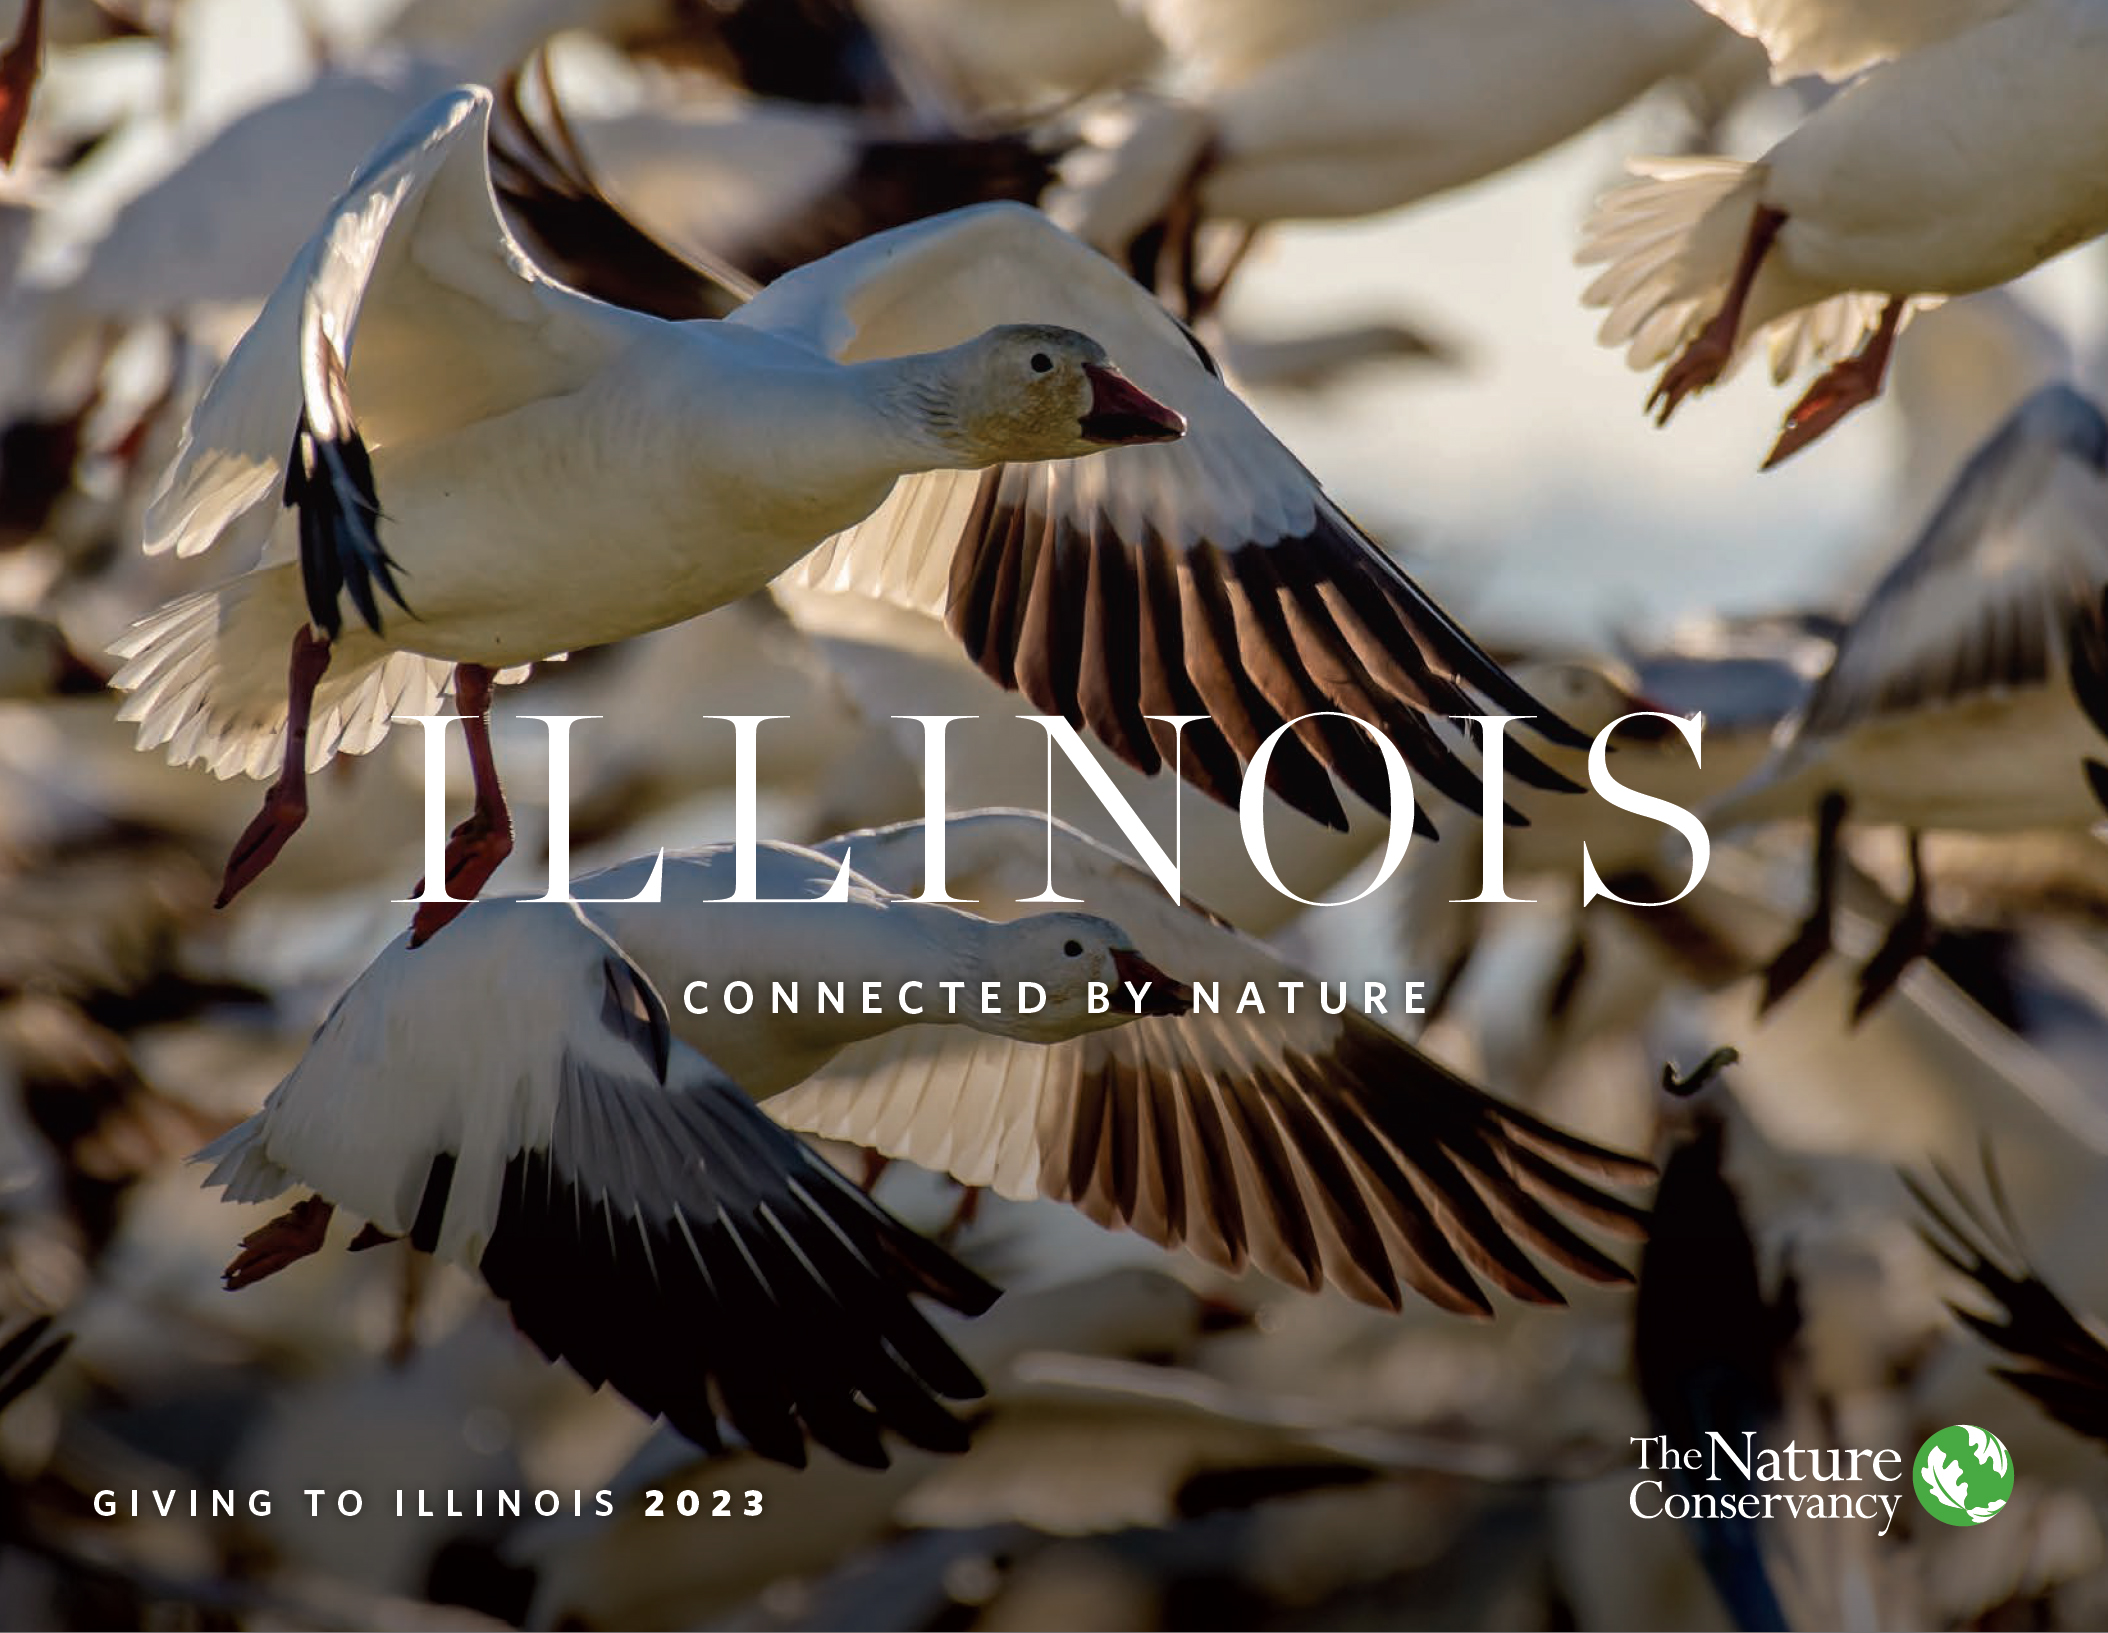 No matter where you are in Illinois—whether walking along a tree-lined street or birdwatching in the prairie—here, we are all connected by nature.